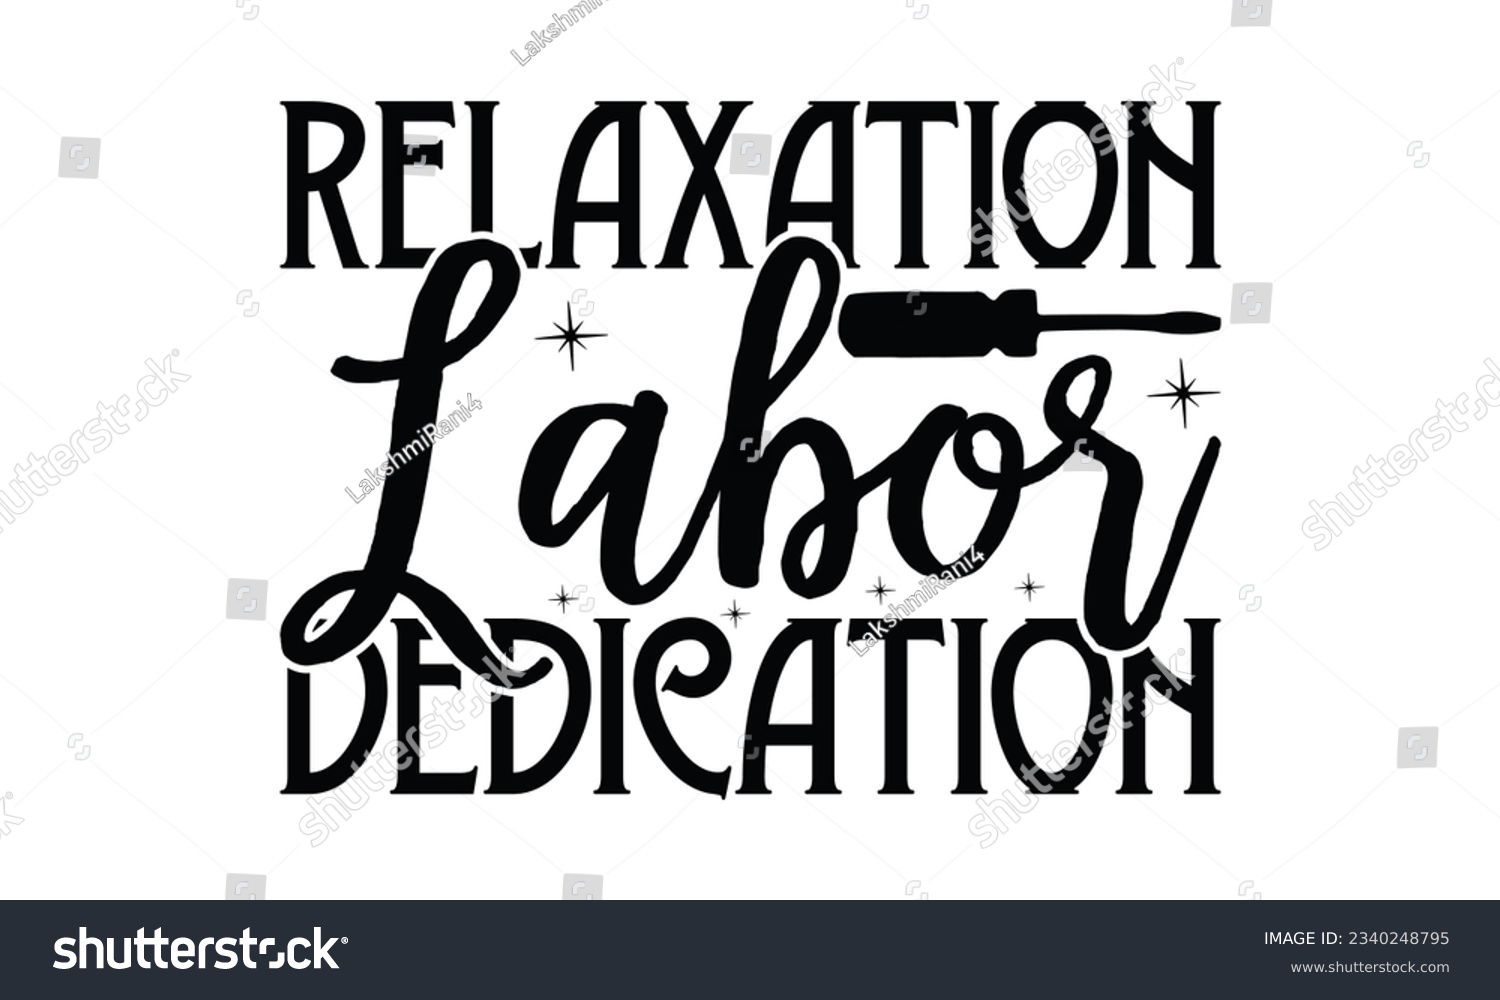 SVG of  Relaxation Labor Dedication - Lettering design for greeting banners, Mouse Pads, Prints, Cards and Posters, Mugs, Notebooks, Floor Pillows and T-shirt prints design. svg